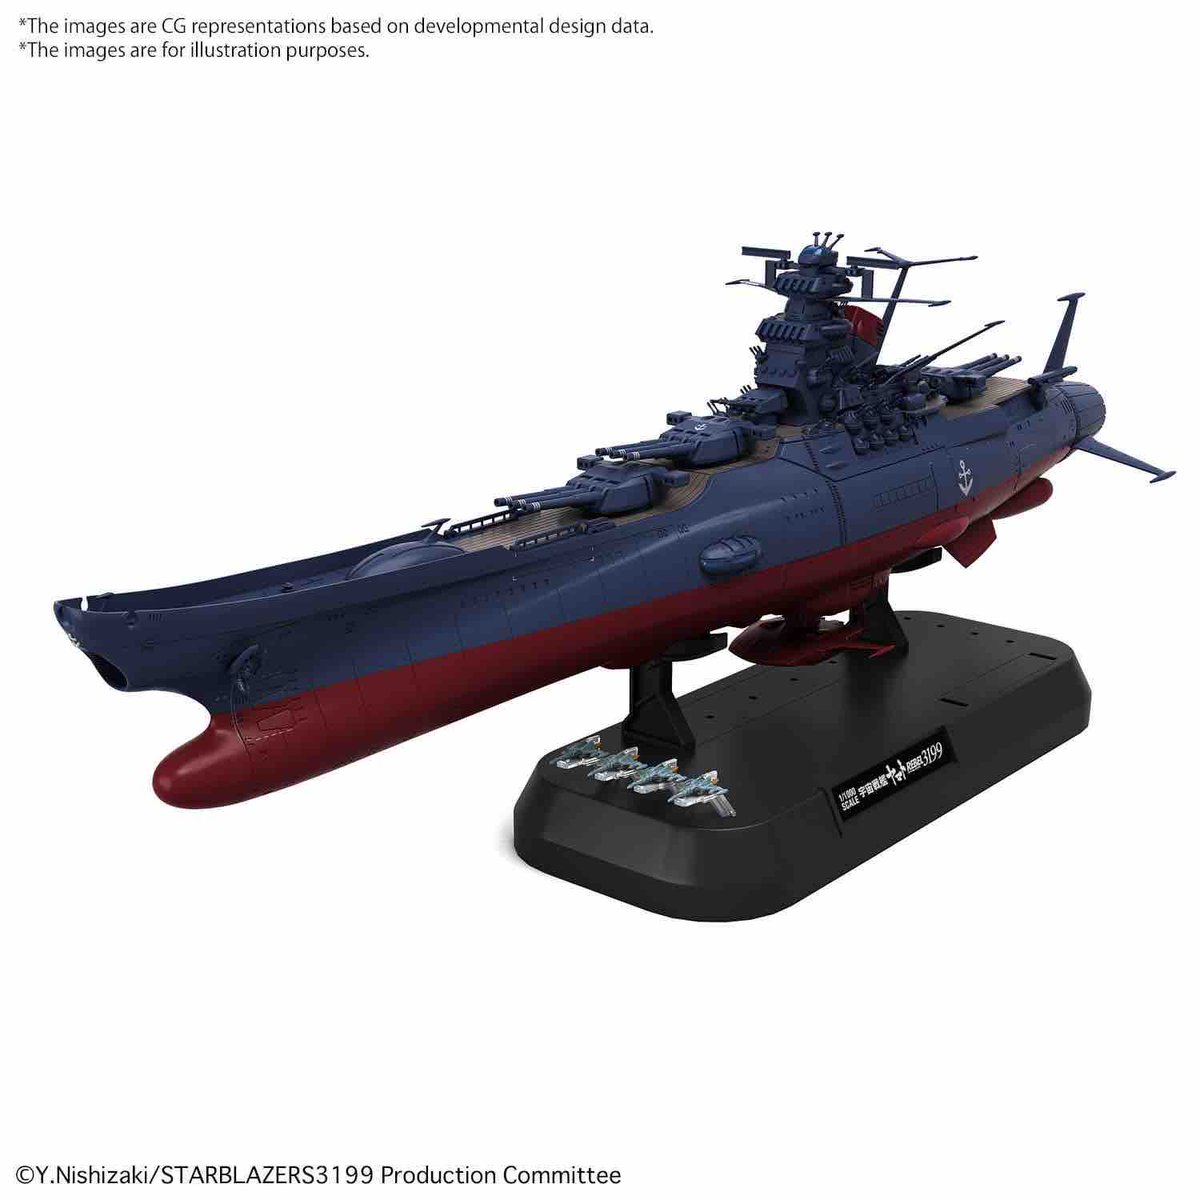 【SHIZUOKA HOBBY SHOW New Information Release】 1/1000 SPACE BATTLESHIP YAMATO 3199 (Tentative) Bow parts are included, and a selectable 2205 version can be reproduced. #STARBLAZERSSPACEBATTLESHIPYAMATO #plasticmodelkit